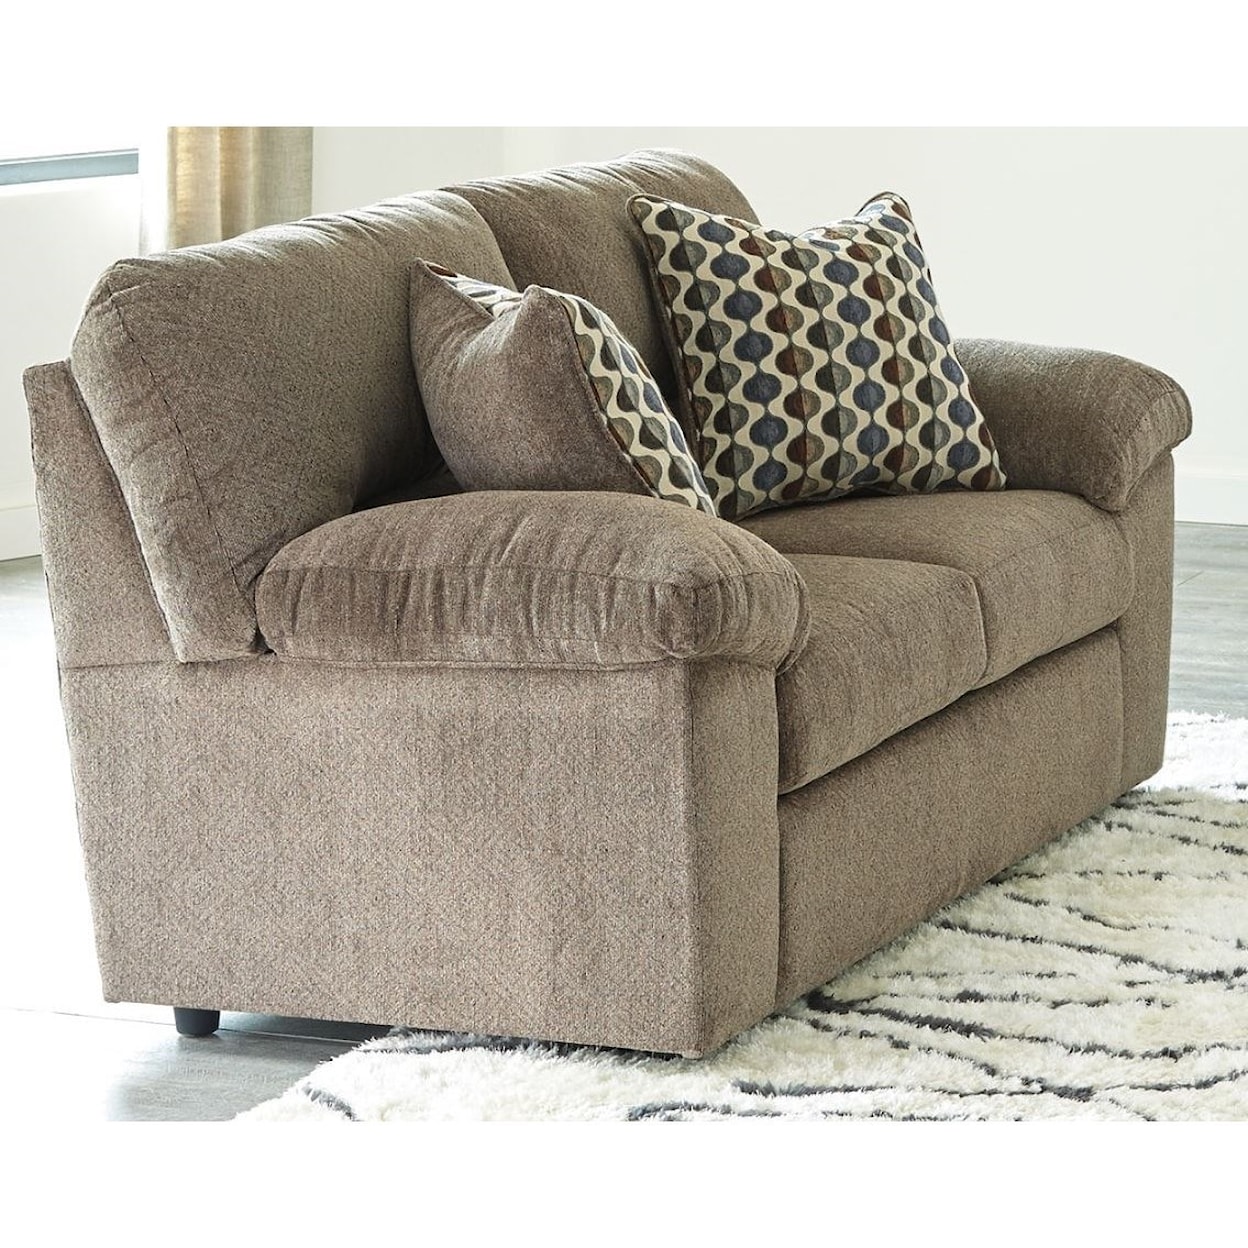 Signature Design by Ashley Pindall Loveseat